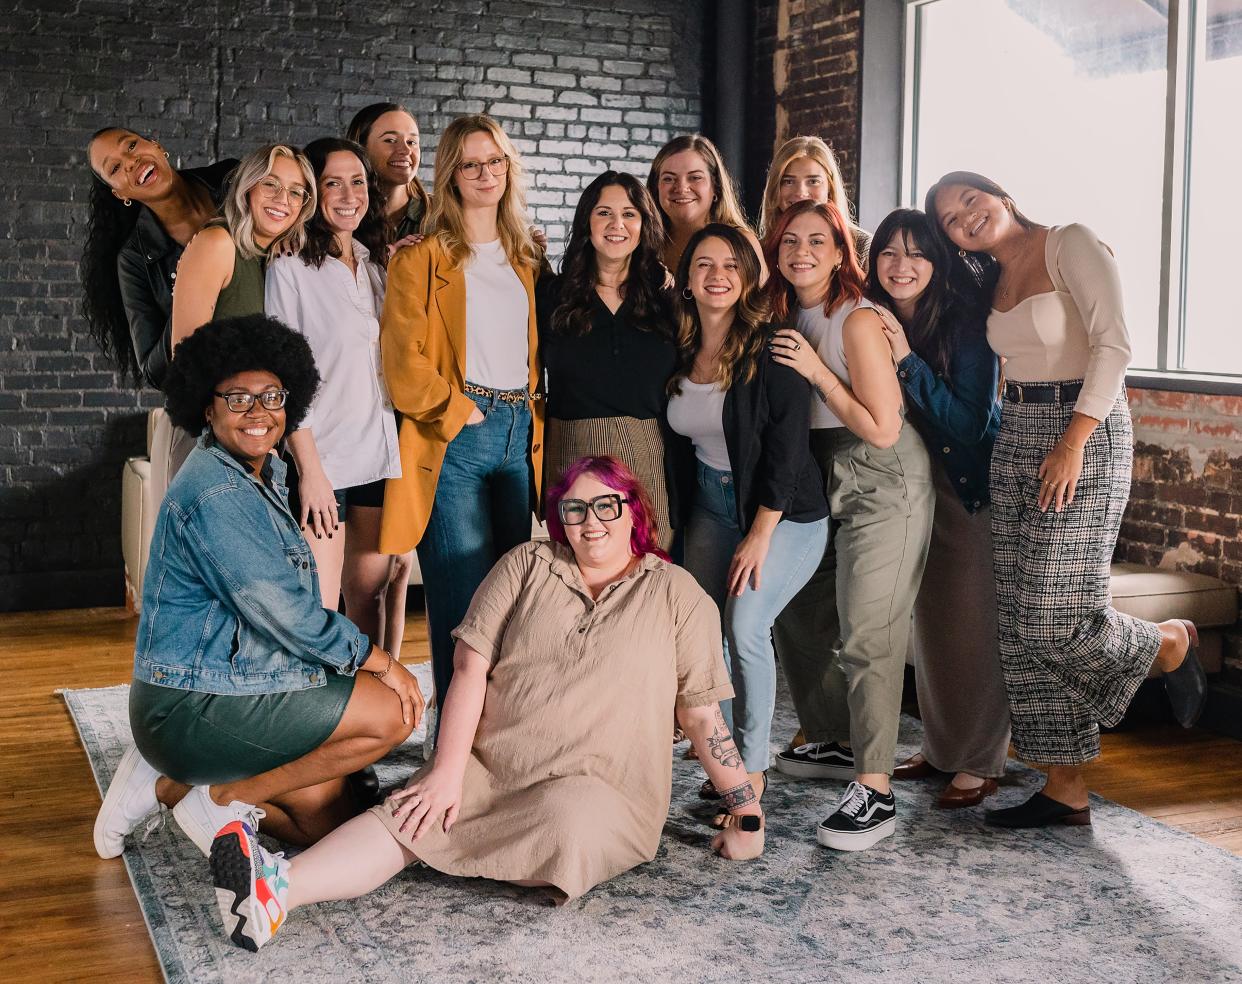 In November 2022, Chelsea DuDeVoire Careccia (standing center, wearing black) posed in Jacksonville with a mix of staff, board, members and social media followers of Each is Every, the women's group she launched a few months later.